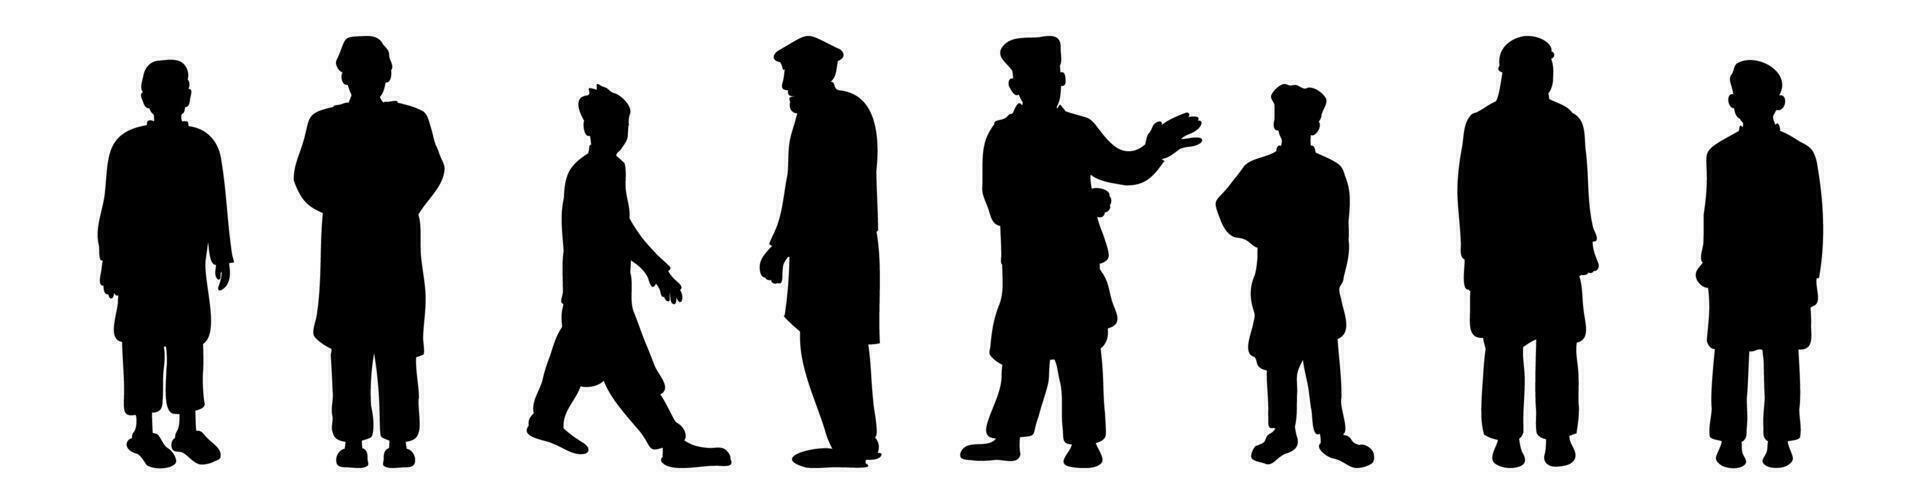 Muslim Arab Asia different poses men silhouettes set. Boys, youth and old man wearing Shalwar kameez traditional dress. Inclusiveness and diversity design elements vector illustration.